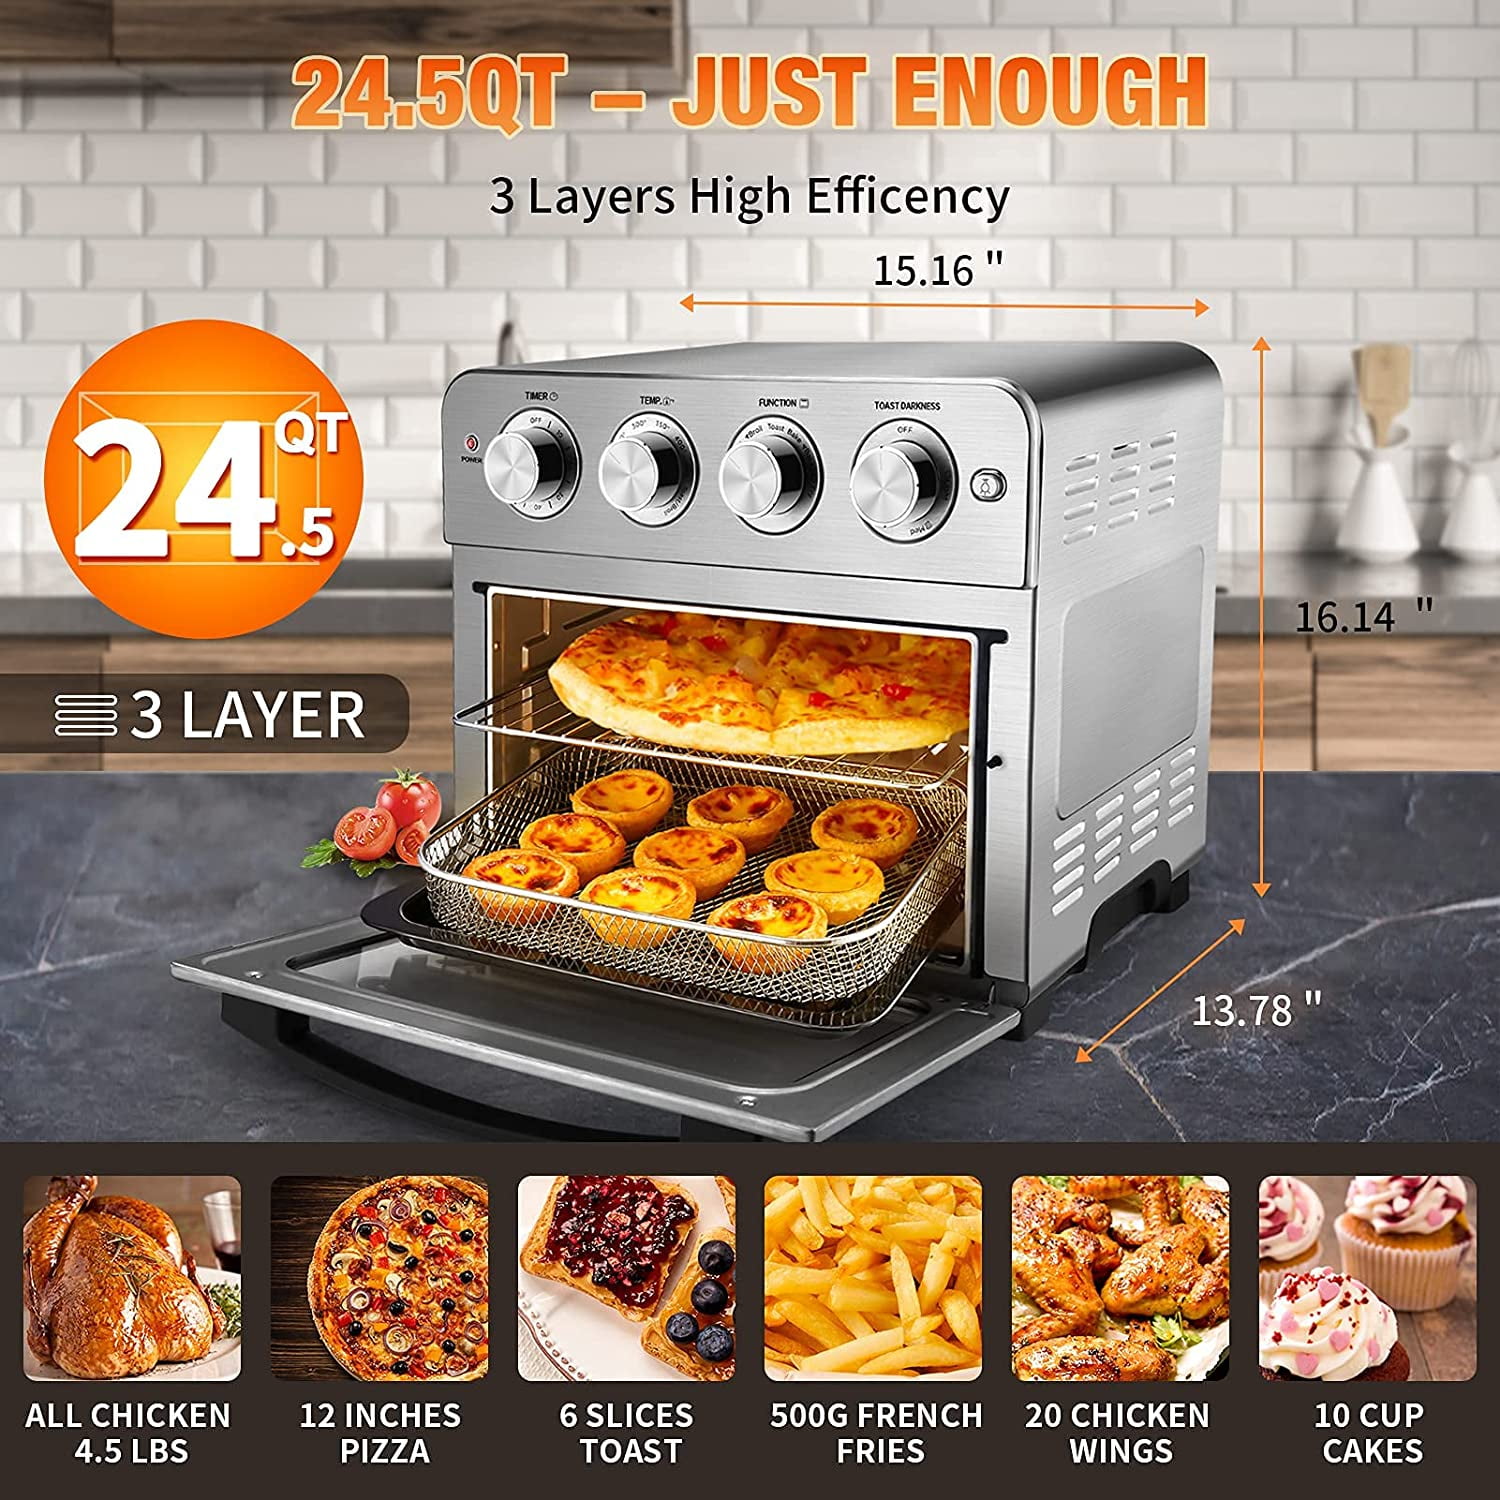 Dehydrate 7 in 1 Convection Airfryer Toaster Oven Fry Oil-Free Bake Accessories & Cookbook Broil Reheat 23L Stainless steel 1700W Geek Chef Air Fryer Roast 